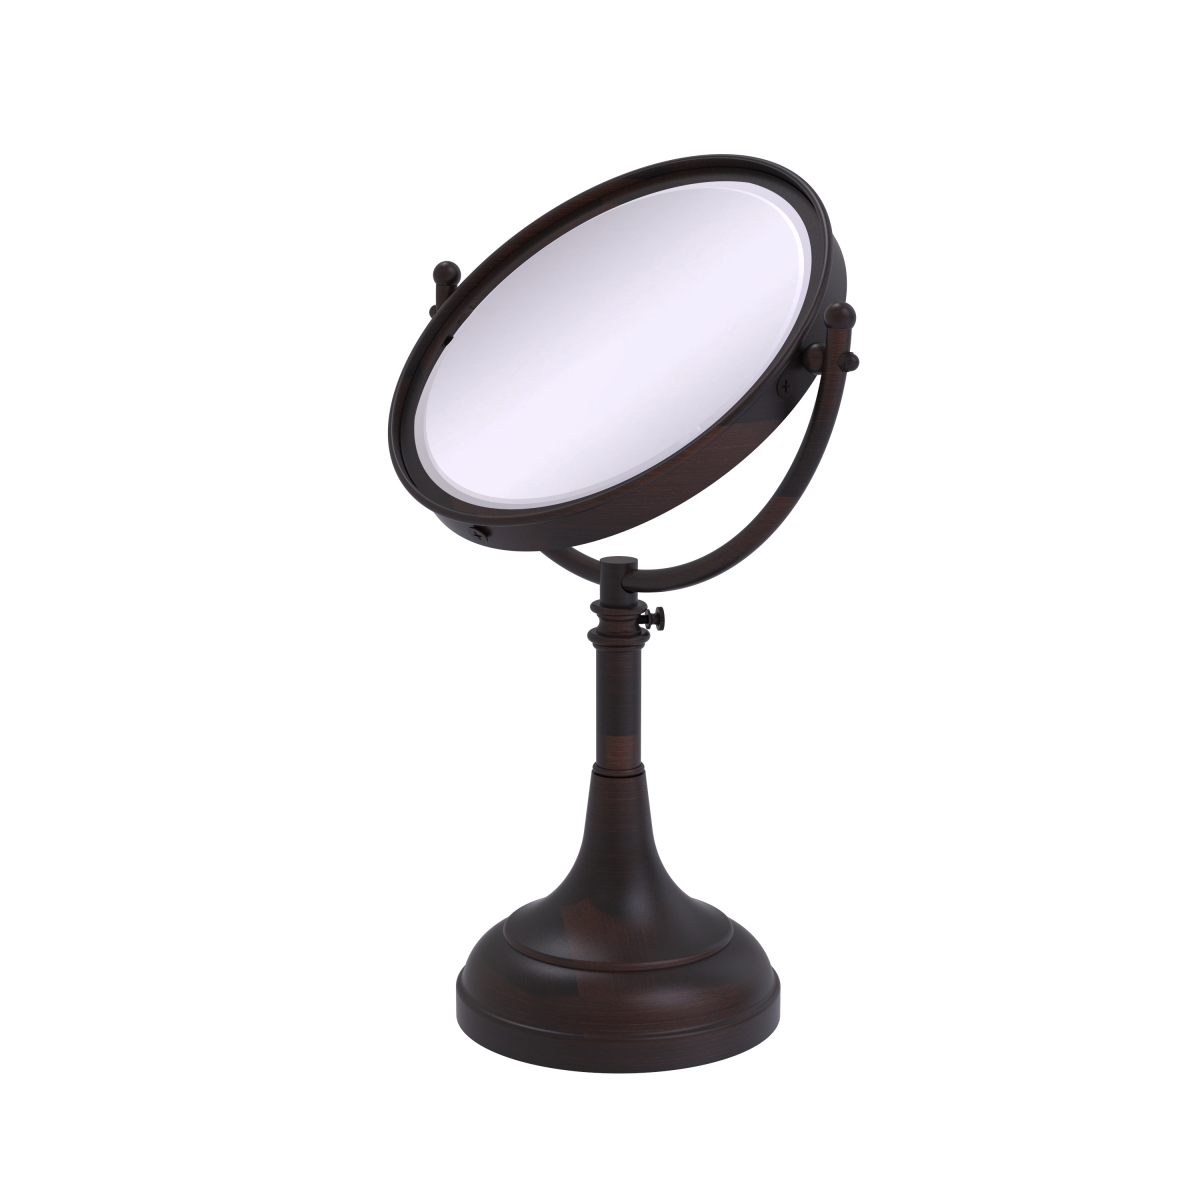 Picture of Allied Brass DM-1-4X-VB 8 in. Height Adjustable Vanity Top Make-Up Mirror 4X Magnification, Venetian Bronze